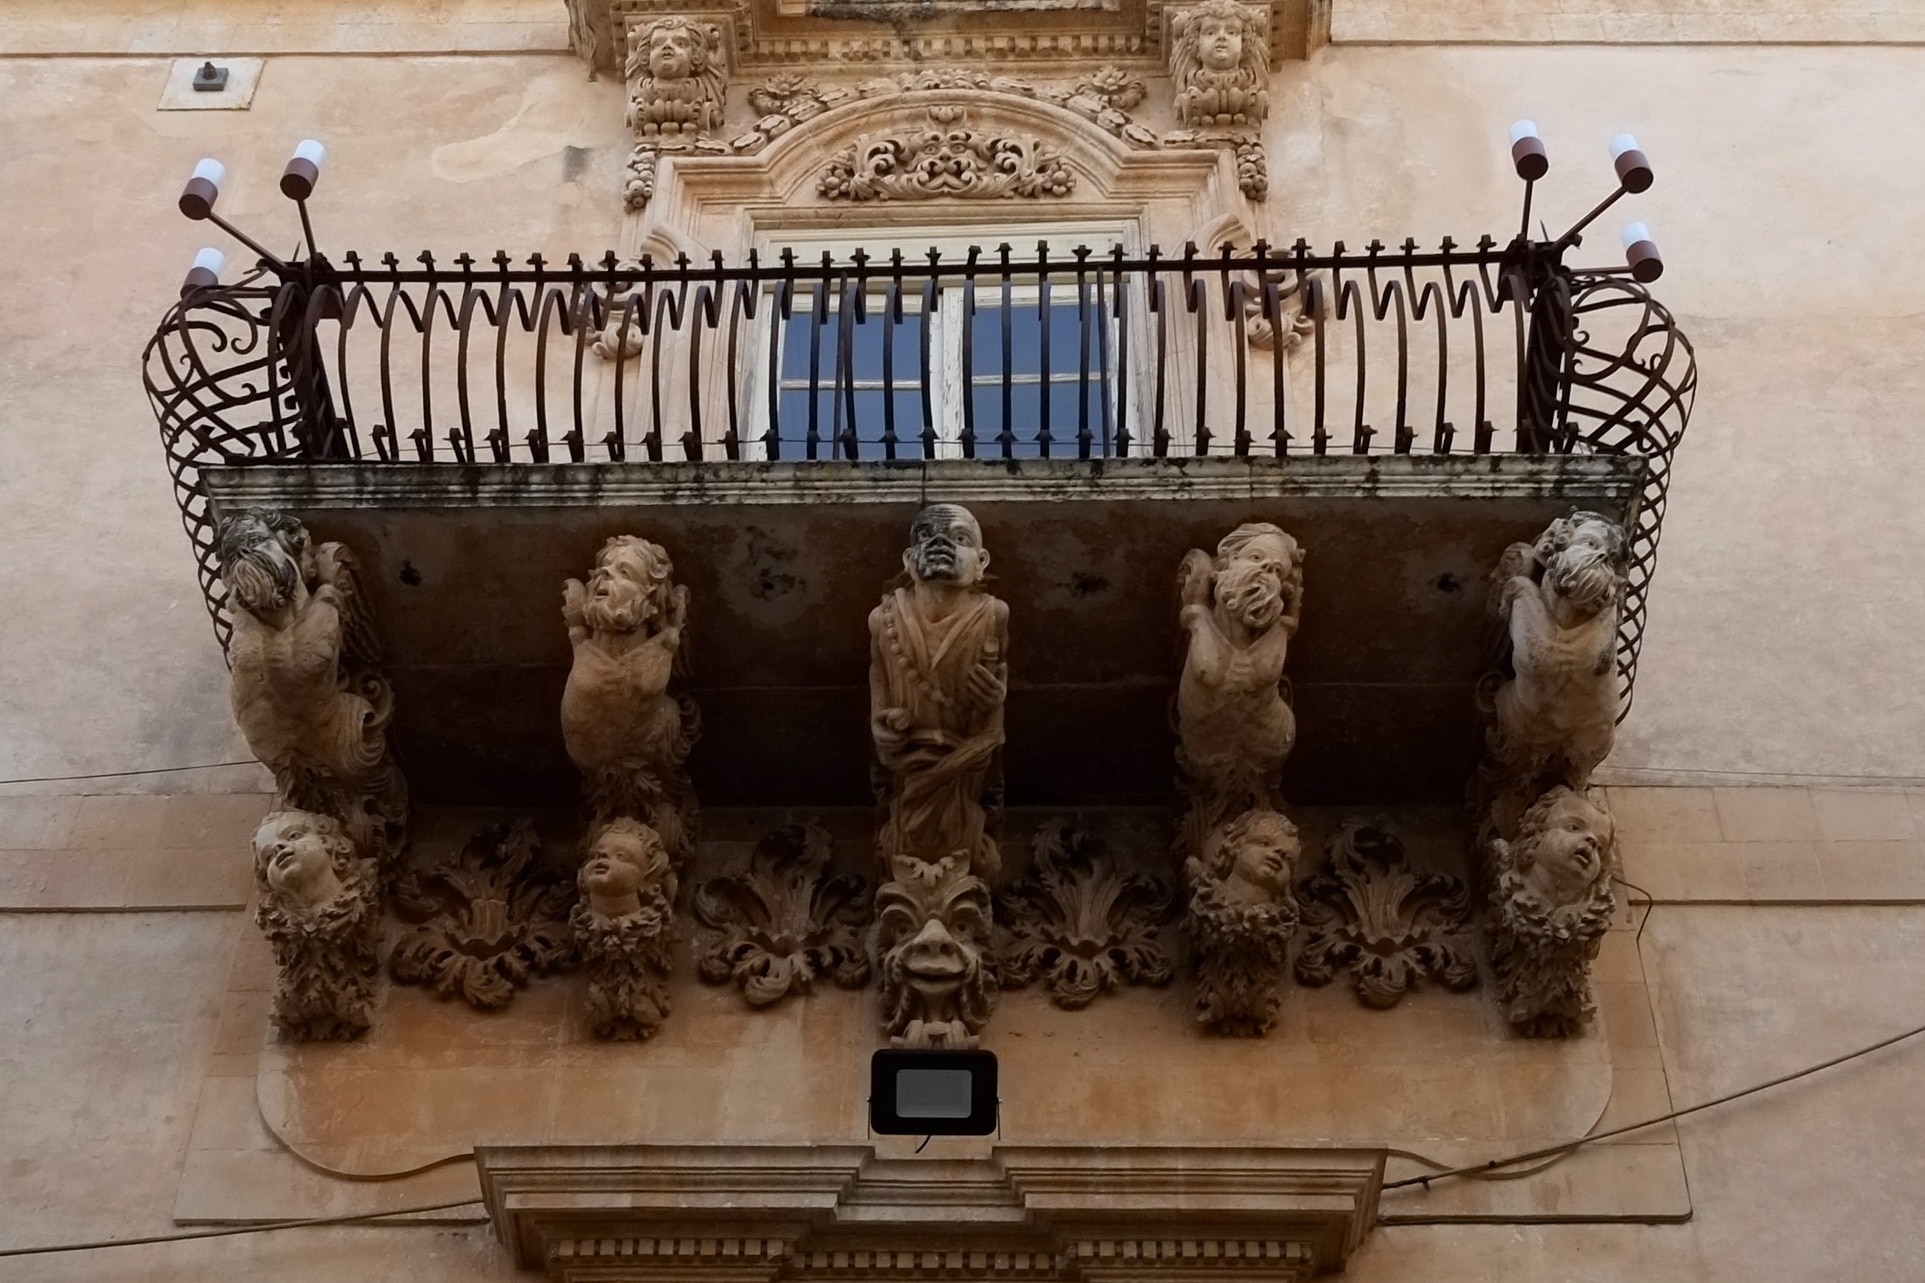 The striking facade of this 18th-century palace features wrought-iron balconies supported by a swirling pantomime of grotesque figures. Inside, the richly brocaded walls and frescoed ceilings offer an idea of the sumptuous lifestyle of Sicilian nobles, as brought to life in the Giuseppe Tomasi di Lampedusa novel Il Gattopardo